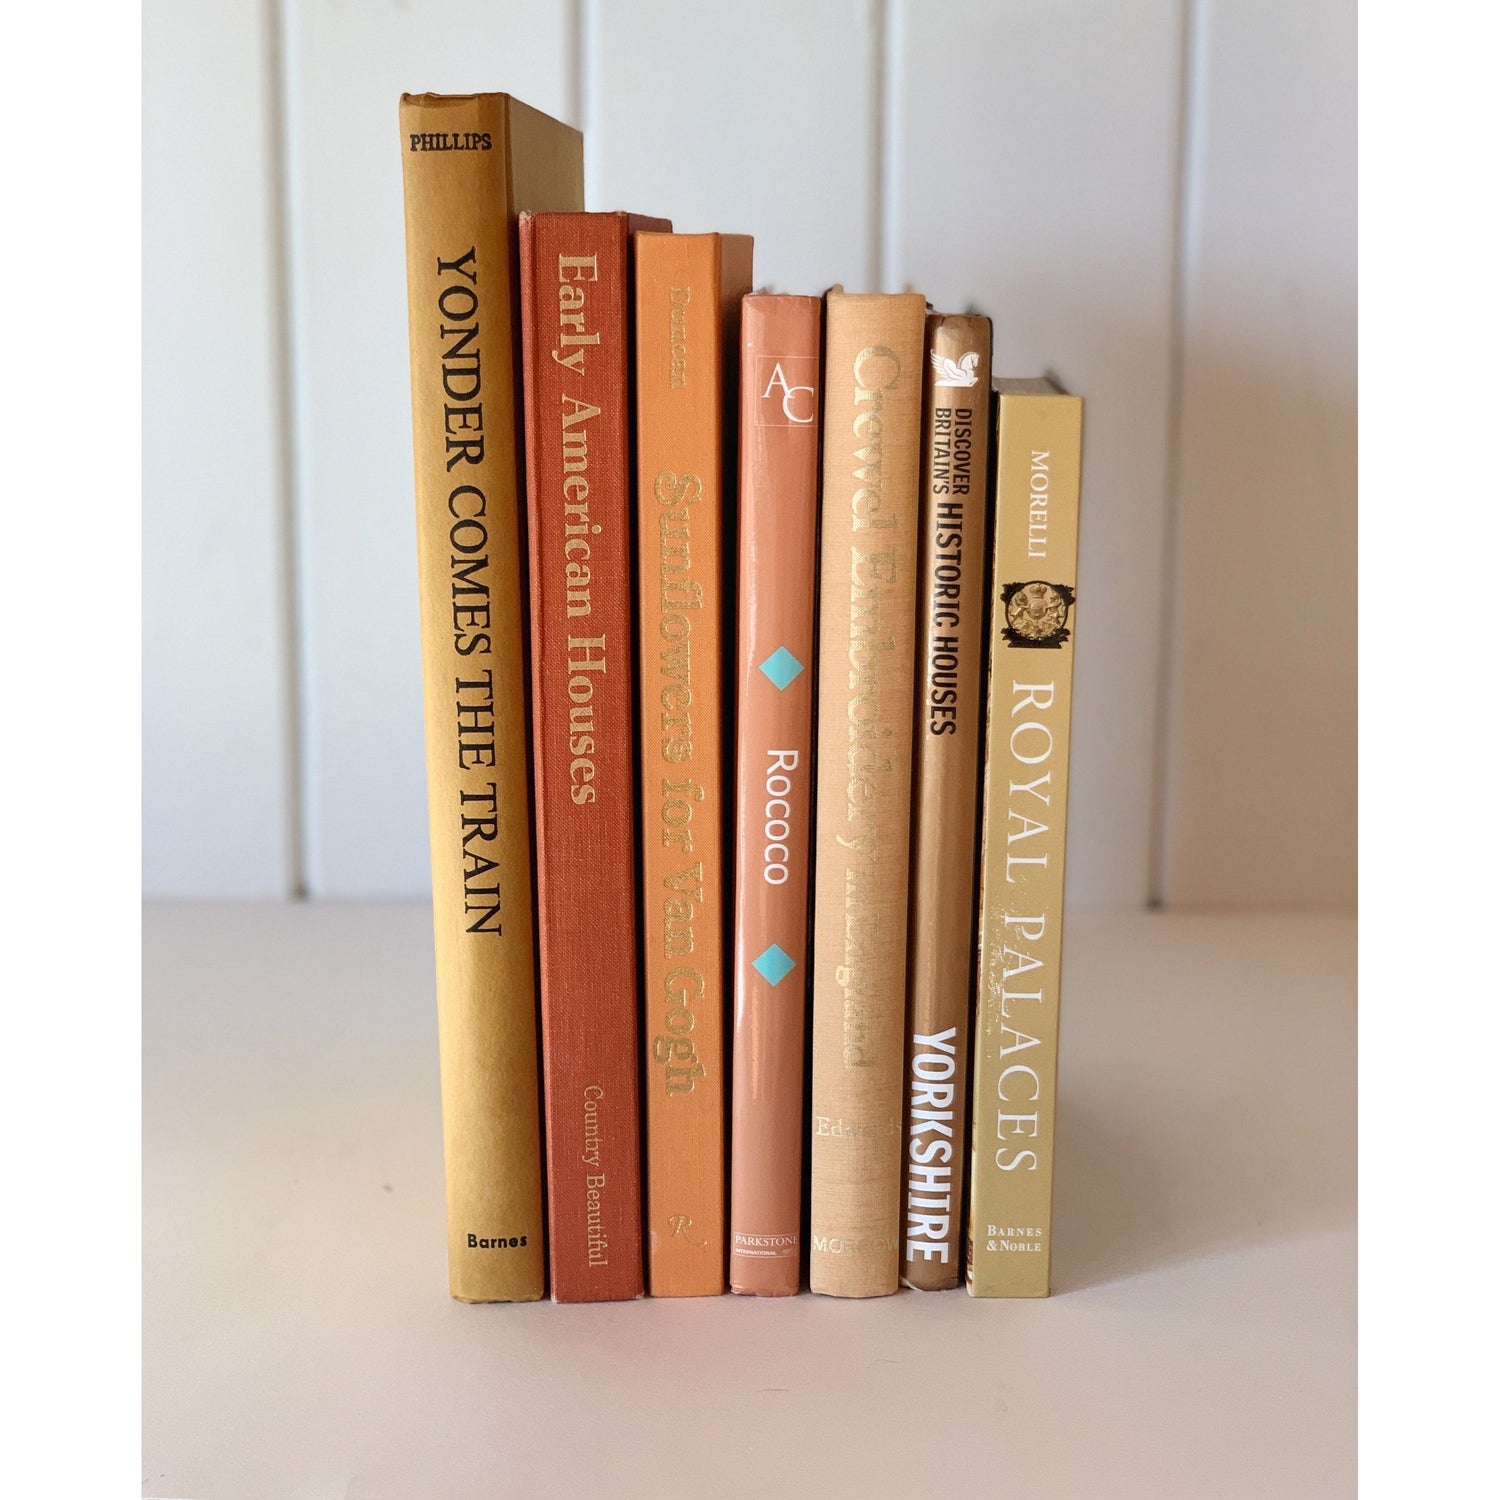 Copper, Gold, Orange, and Mustard Coffee Table Book Set, Curated Books By Color, 1970s Decor